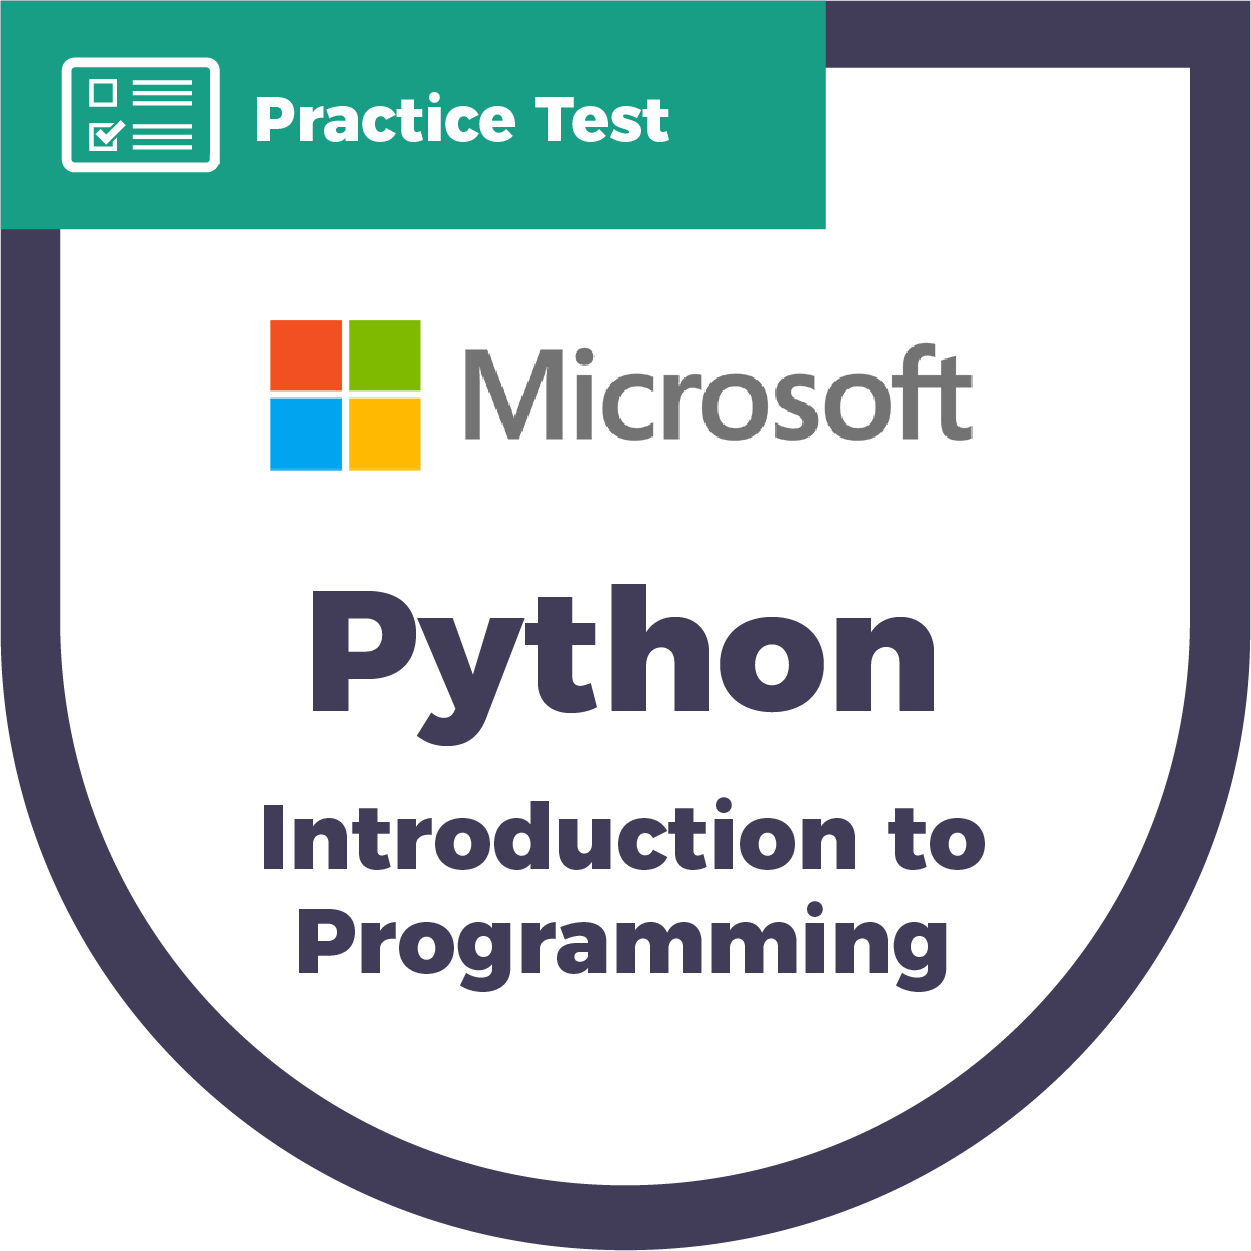 Introduction to Programming Using Python | Practice Test - CyberVista